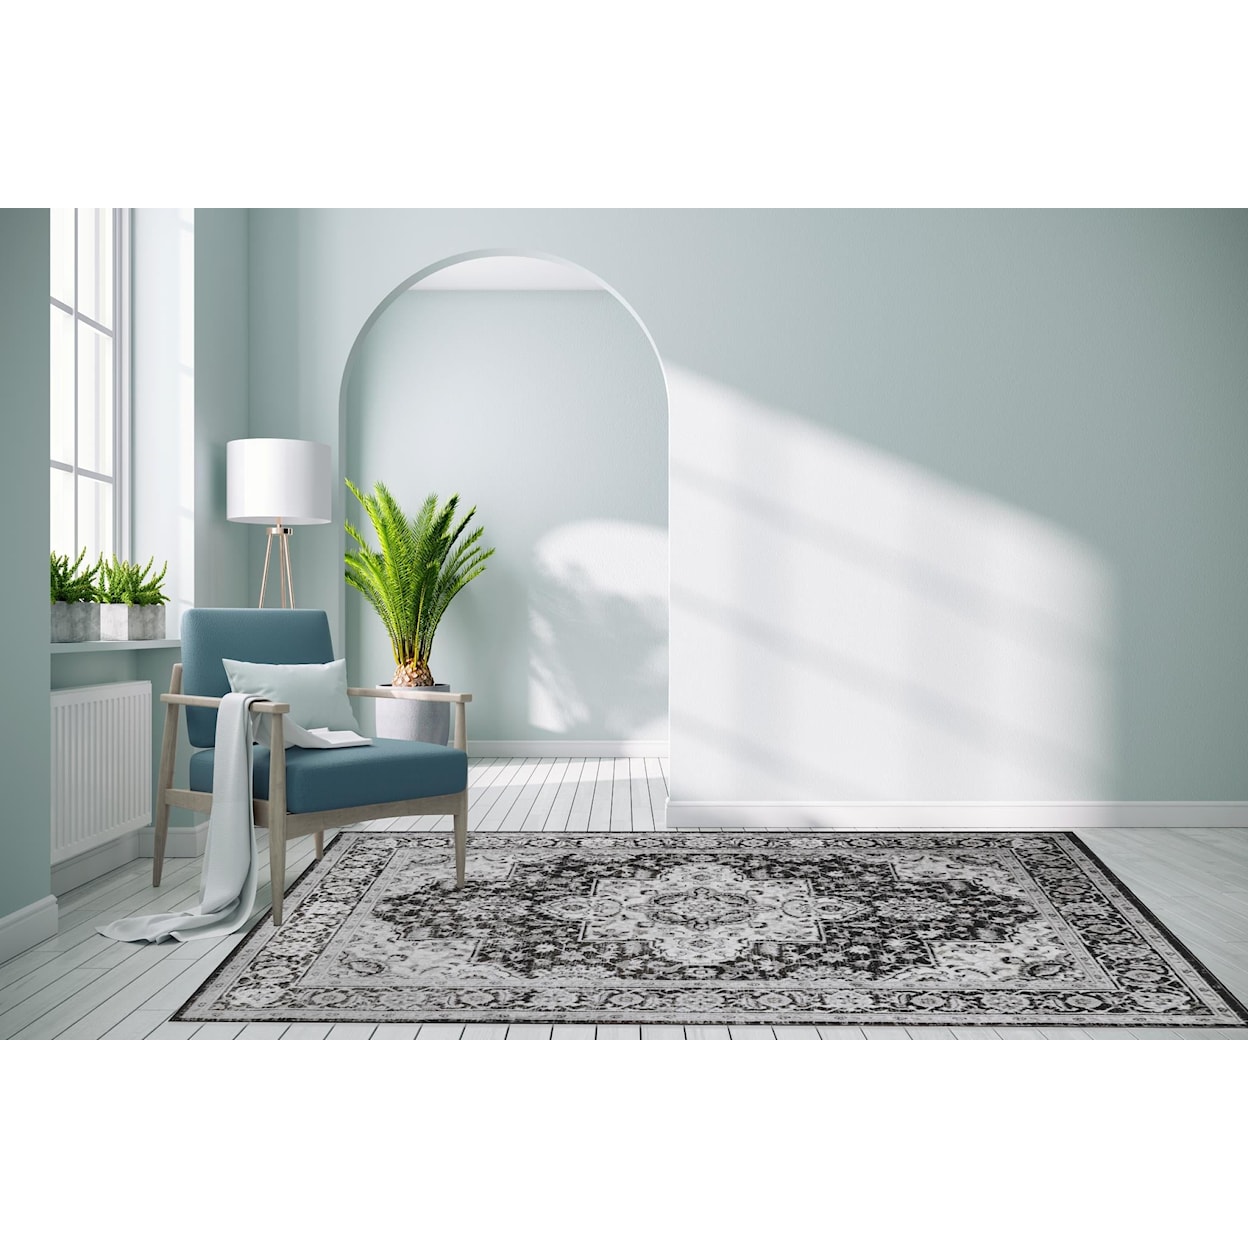 MDA Rugs Trendy Collection TRENDY 8/11 BLACK/WHITE AREA RUG |